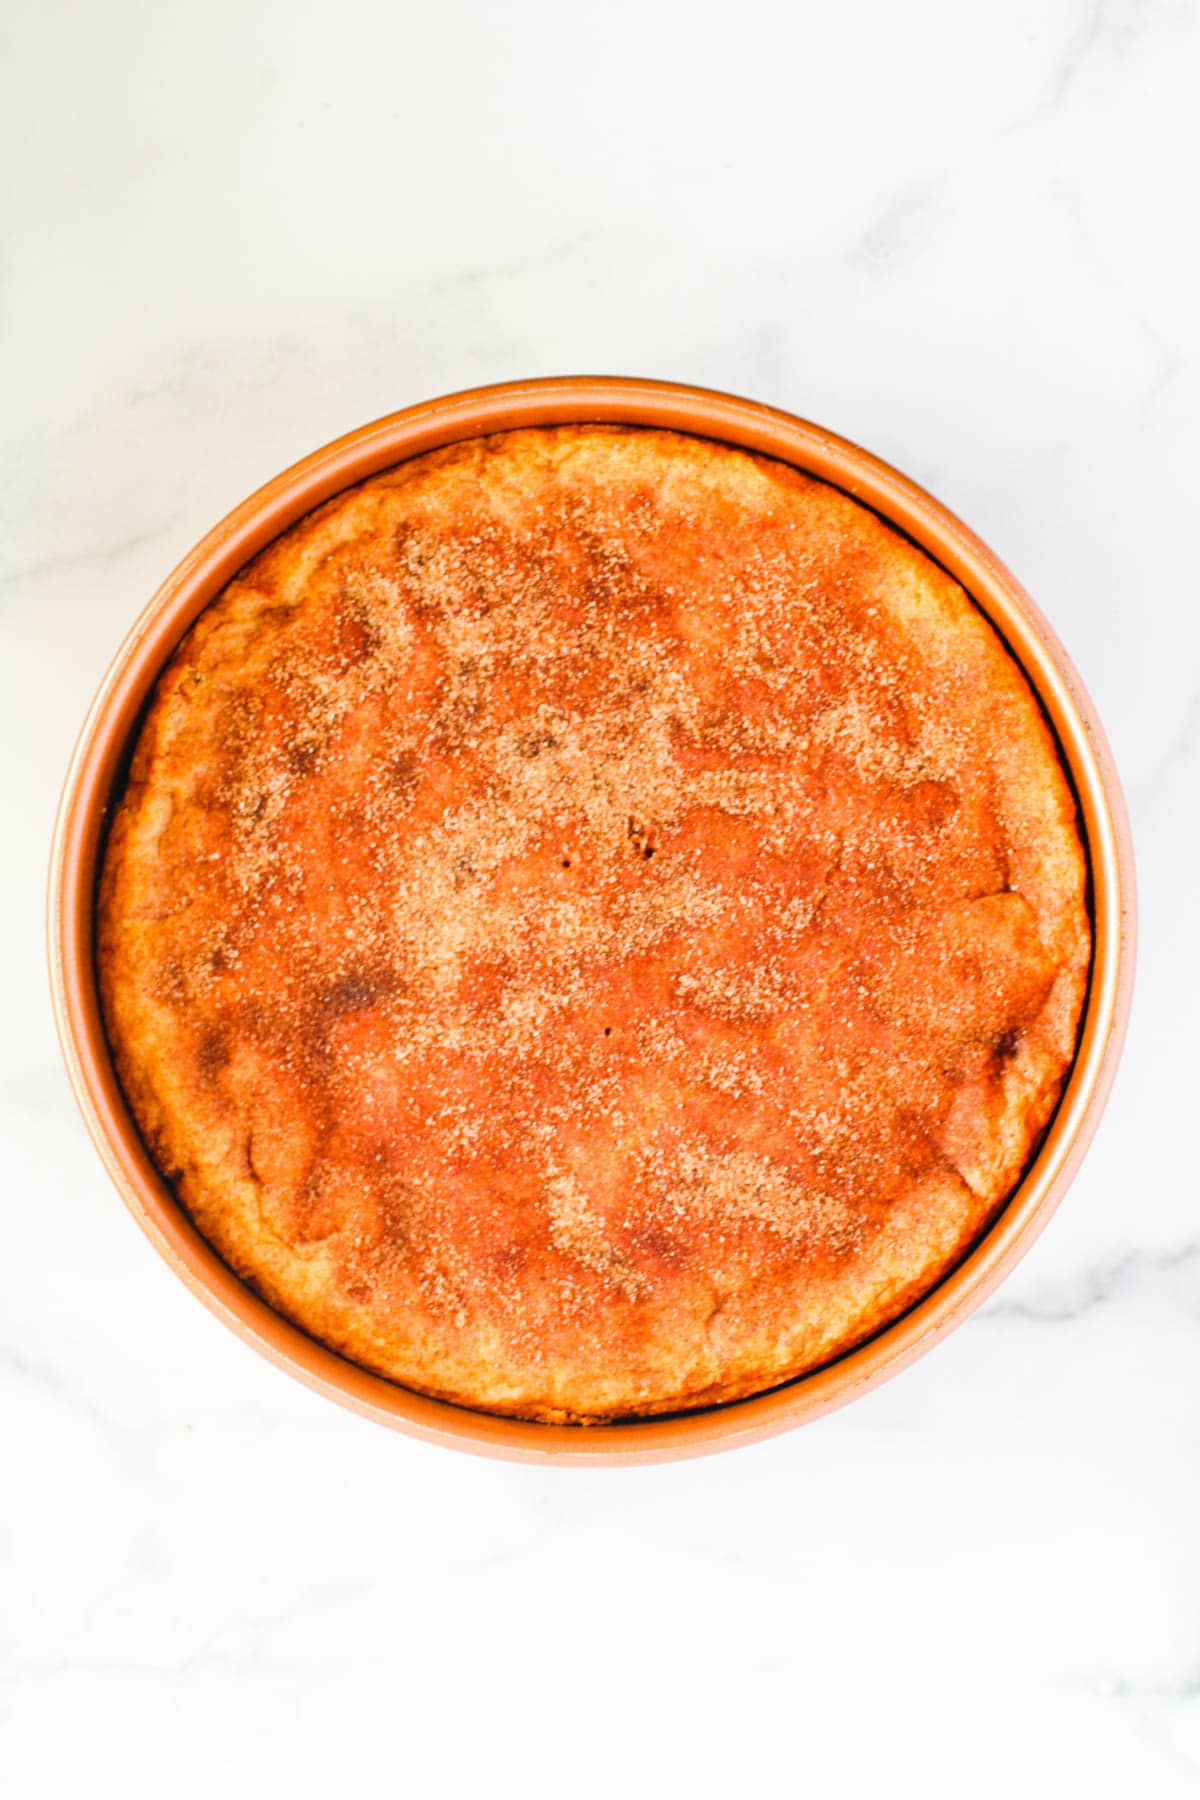 A cinnamon sugar dusted cookie dough pressed into a cake pan.